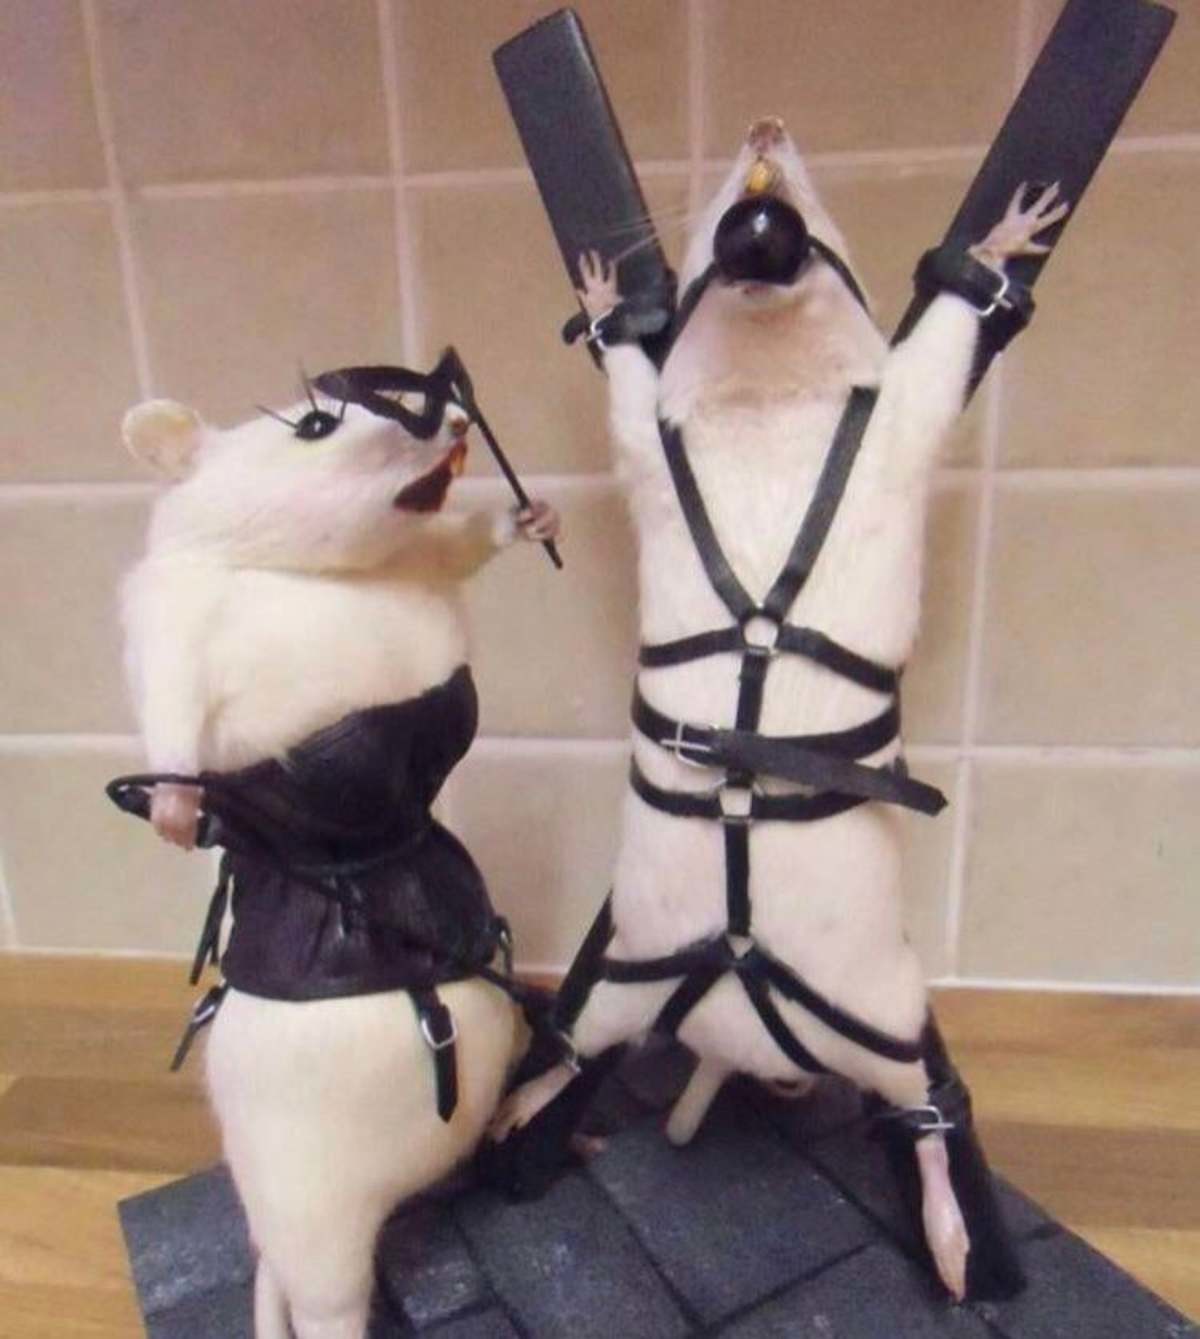 Rat+bdsm+taxidermy+yes+that+title+is+not